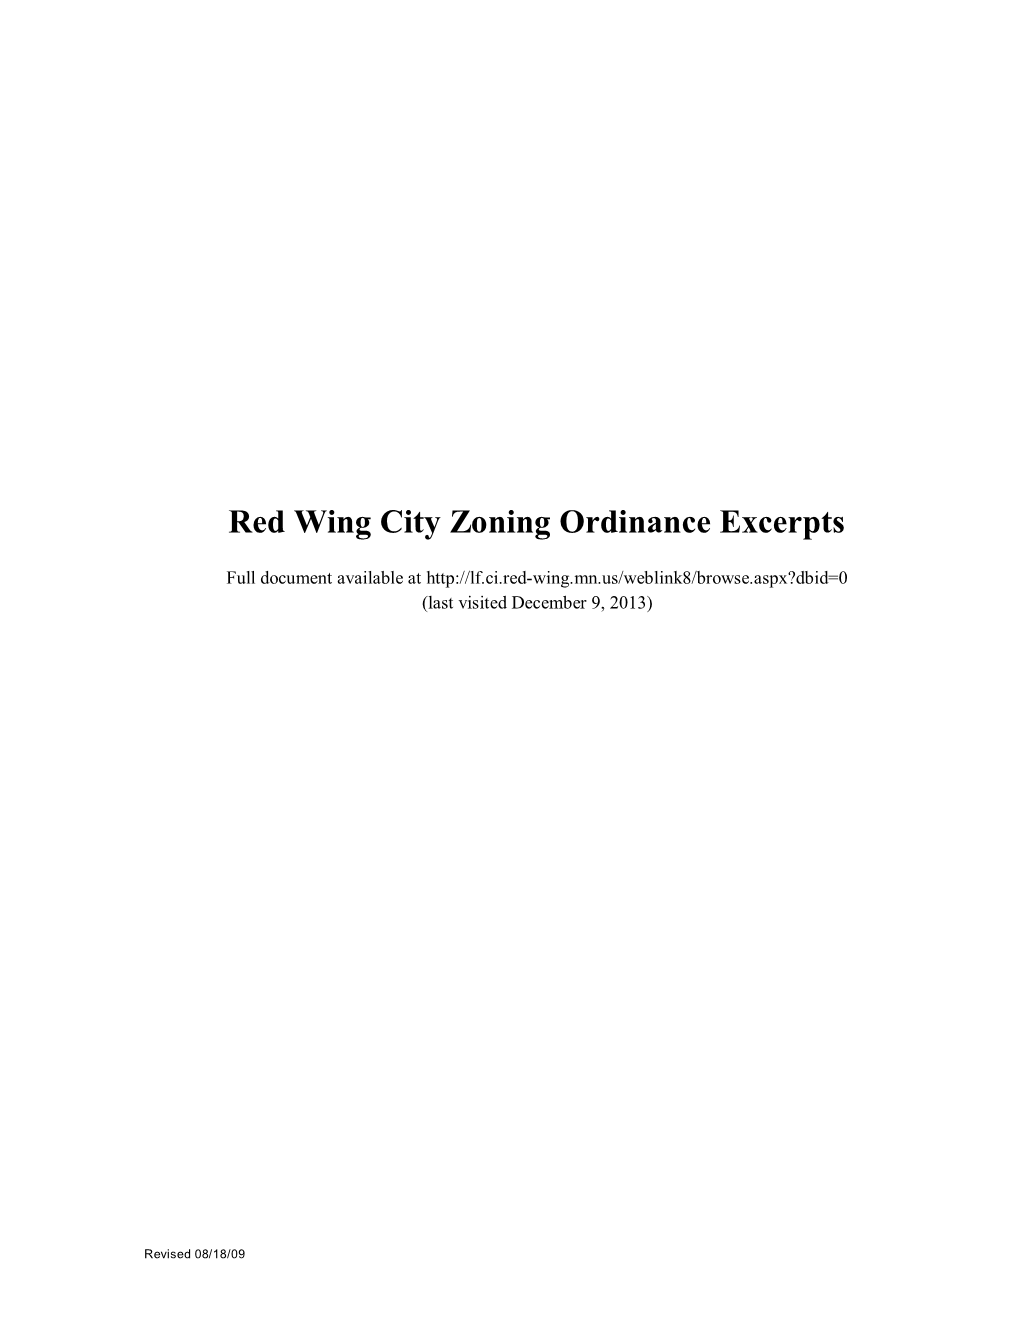 Red Wing City Zoning Ordinance Excerpts